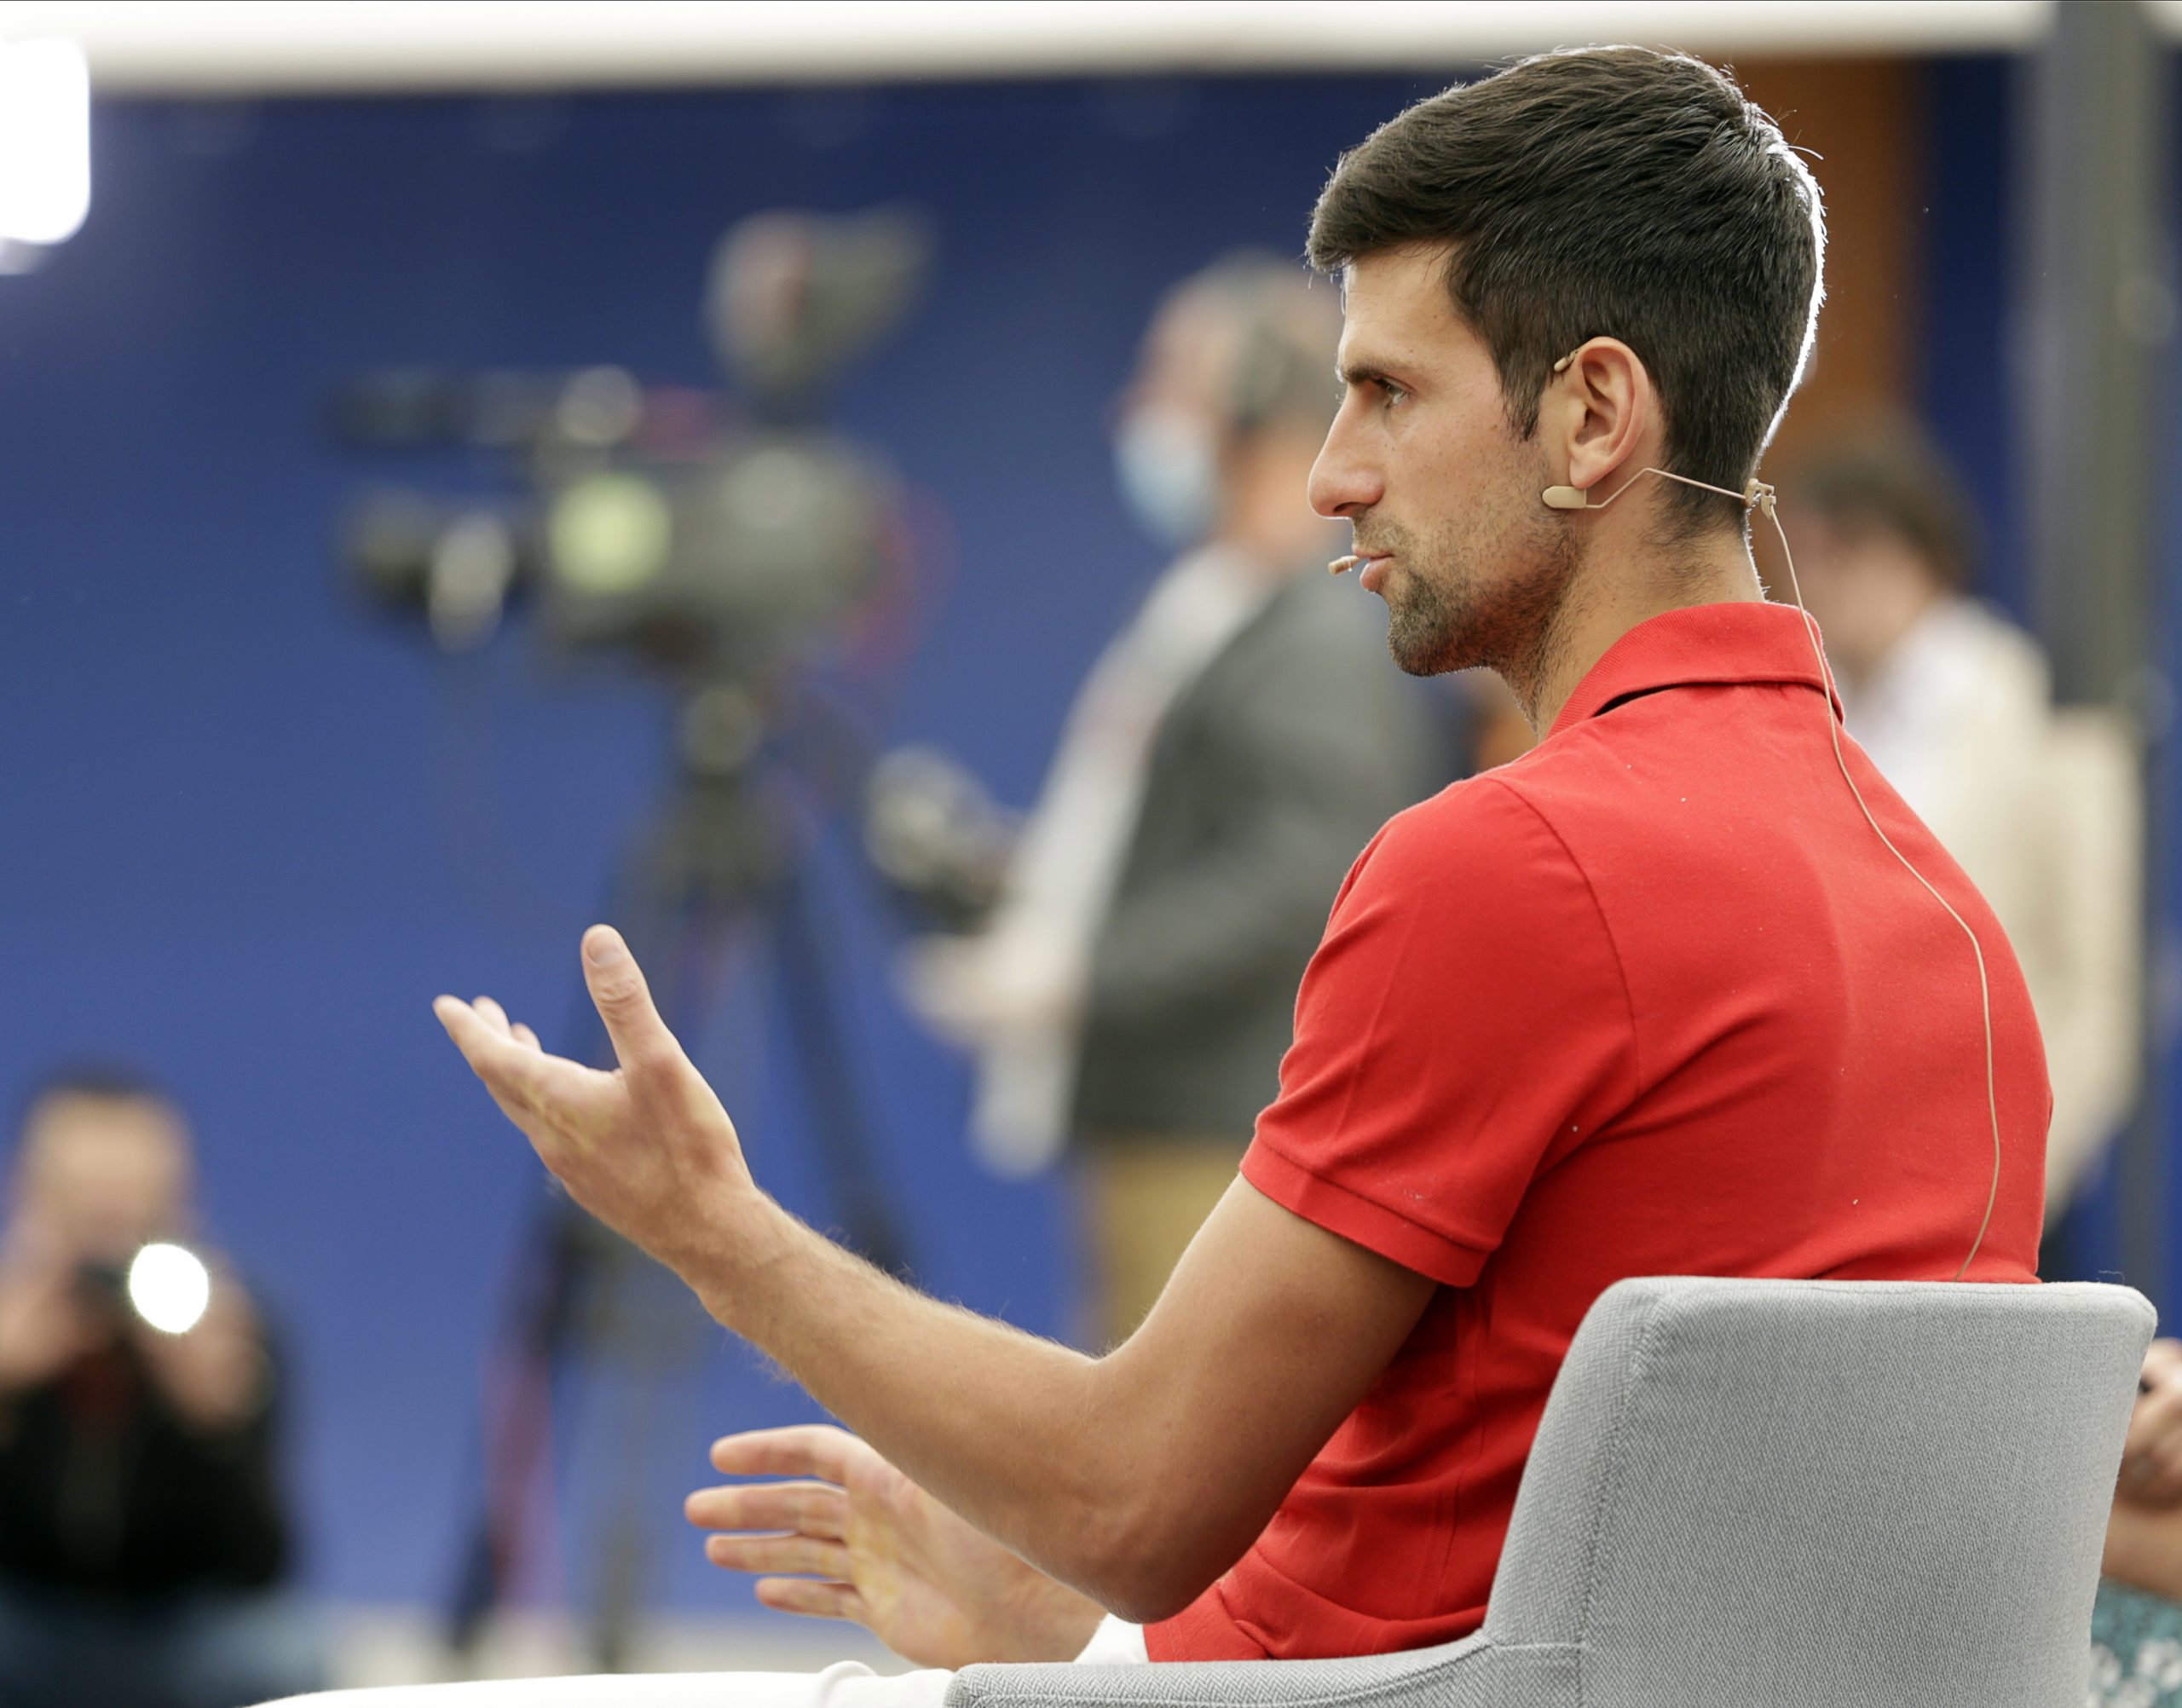 epa08443508 Serbian tennis player Novak Djokovic speaks during a press conference on the upcoming Adria Tour tennis tournament in Belgrade, Serbia, 25 May 2020. Novak Djokovic presented the Adria Tour tennis tournaments to be played in Serbia, Croatia, Montenegro, and Bosnia and Hercegovina.  EPA/ANDREJ CUKIC